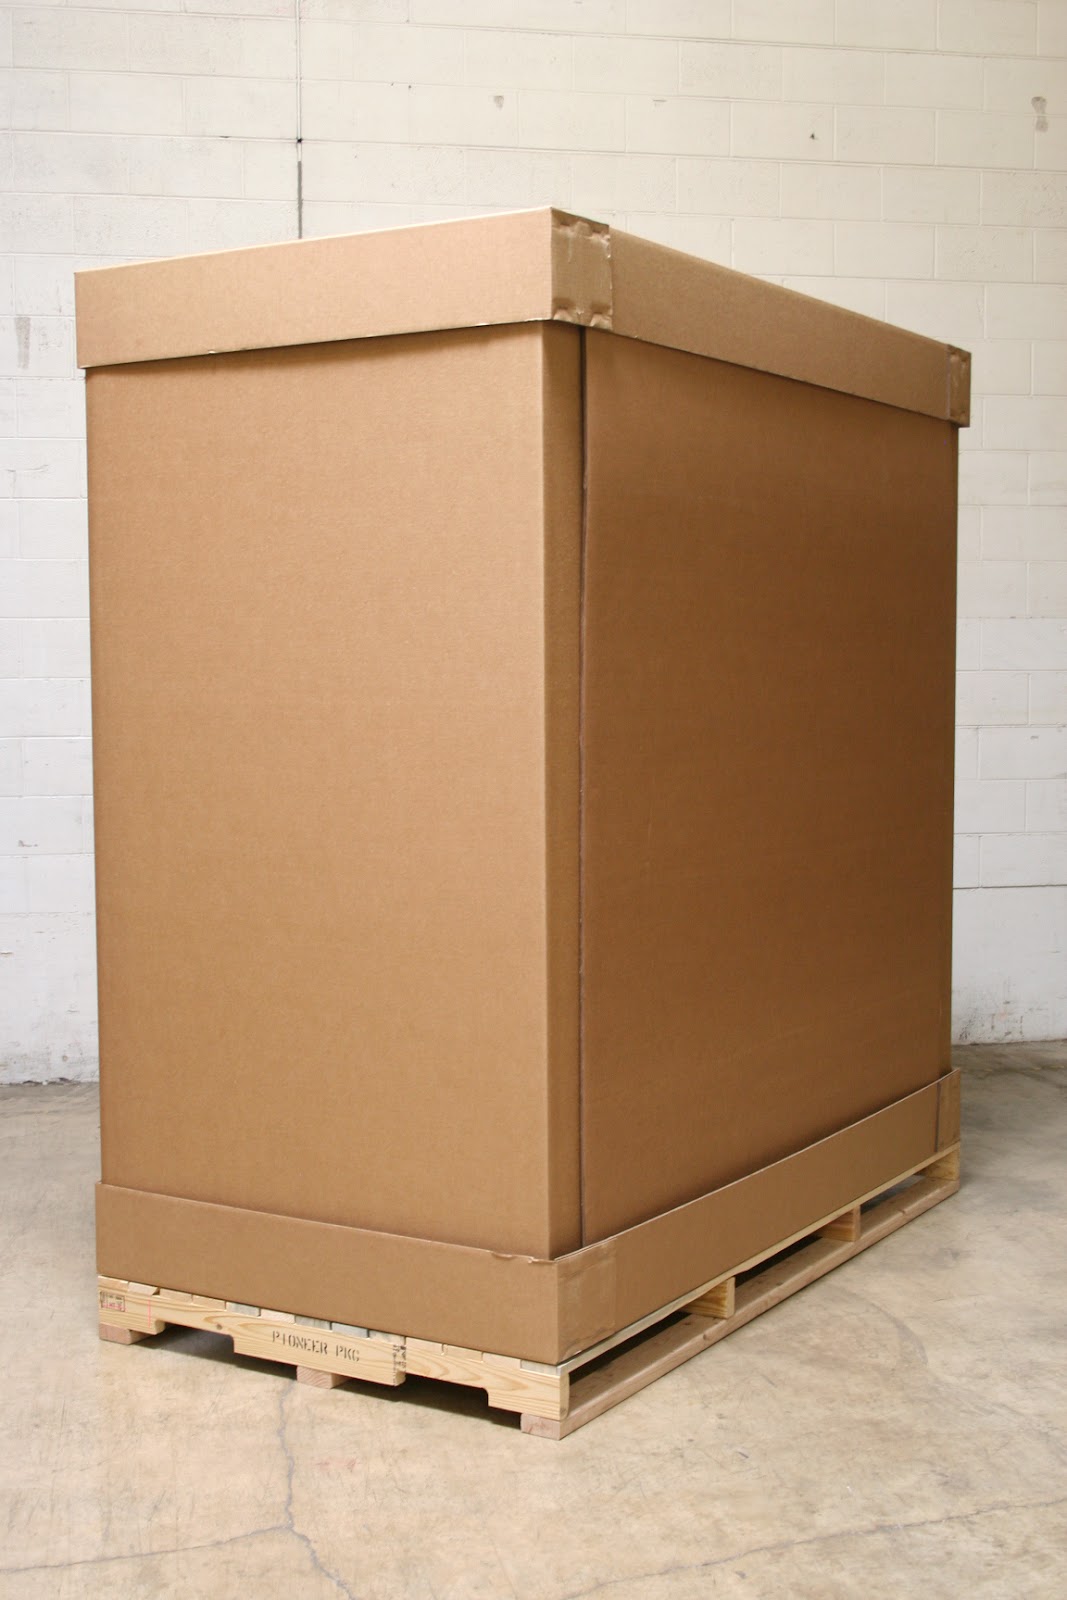 Big Shipping Boxes For Sale Shipping Box Boxes Moving Supplies